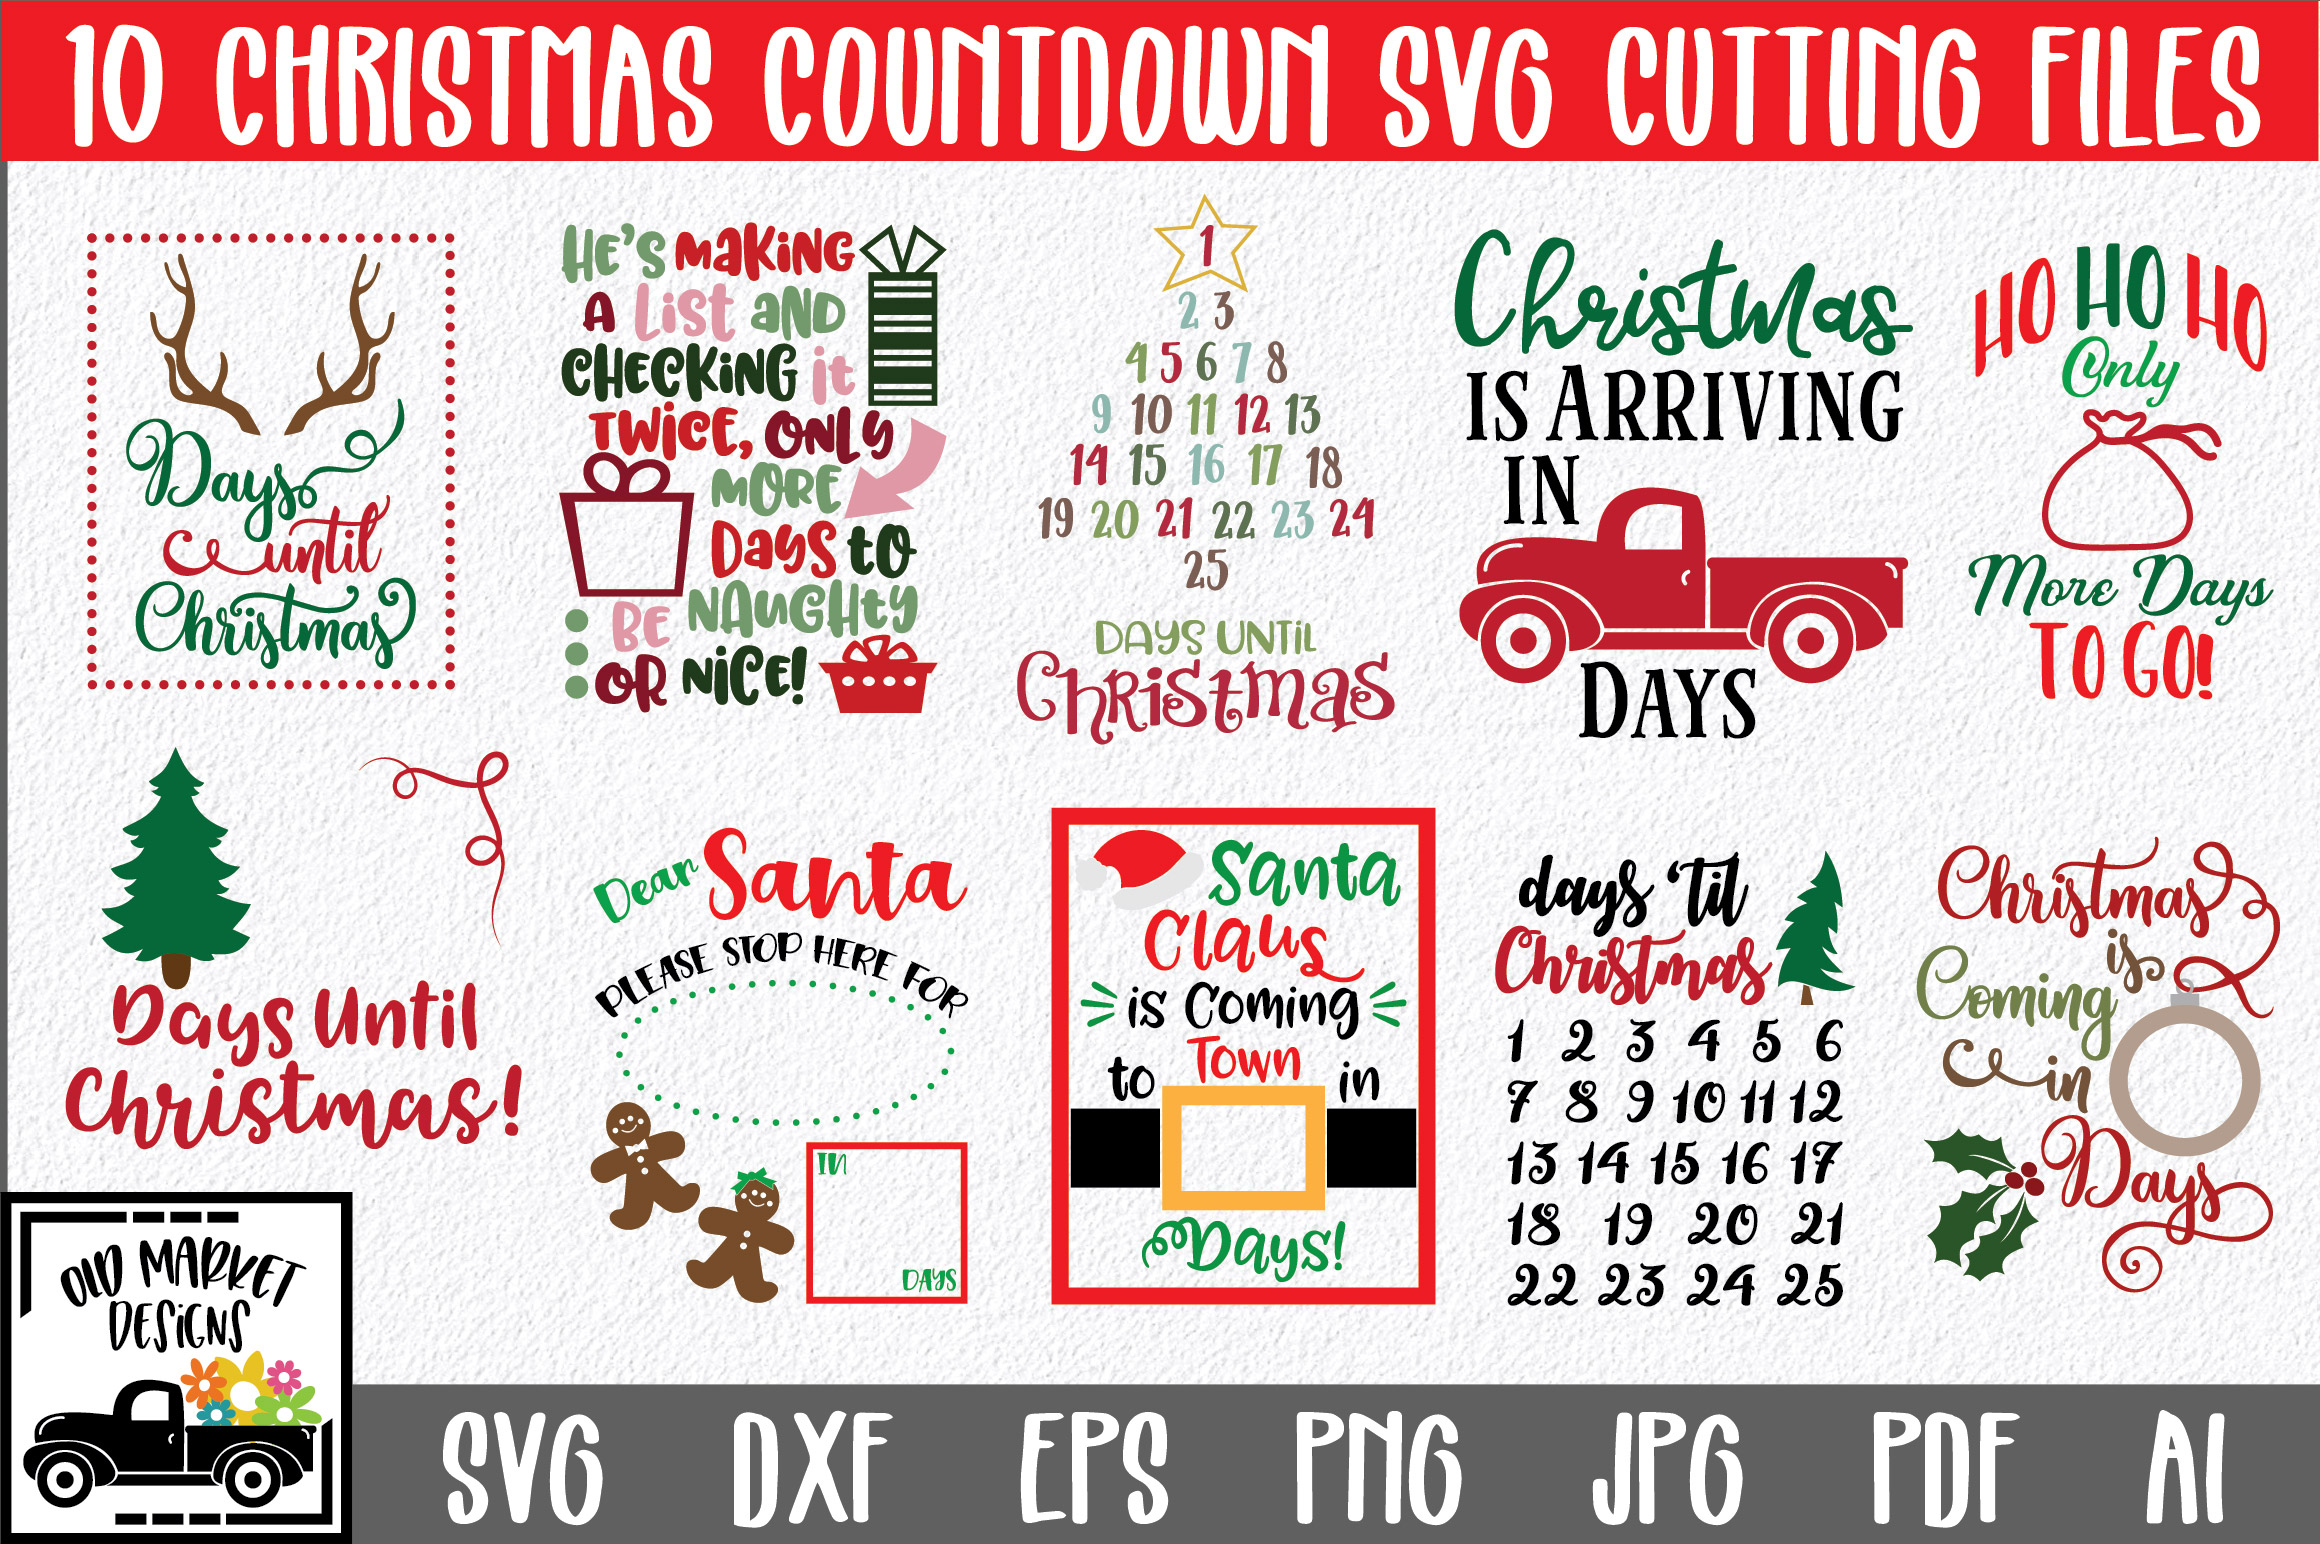 Download Christmas SVG Bundle with 10 Christmas Countdown Cut Files